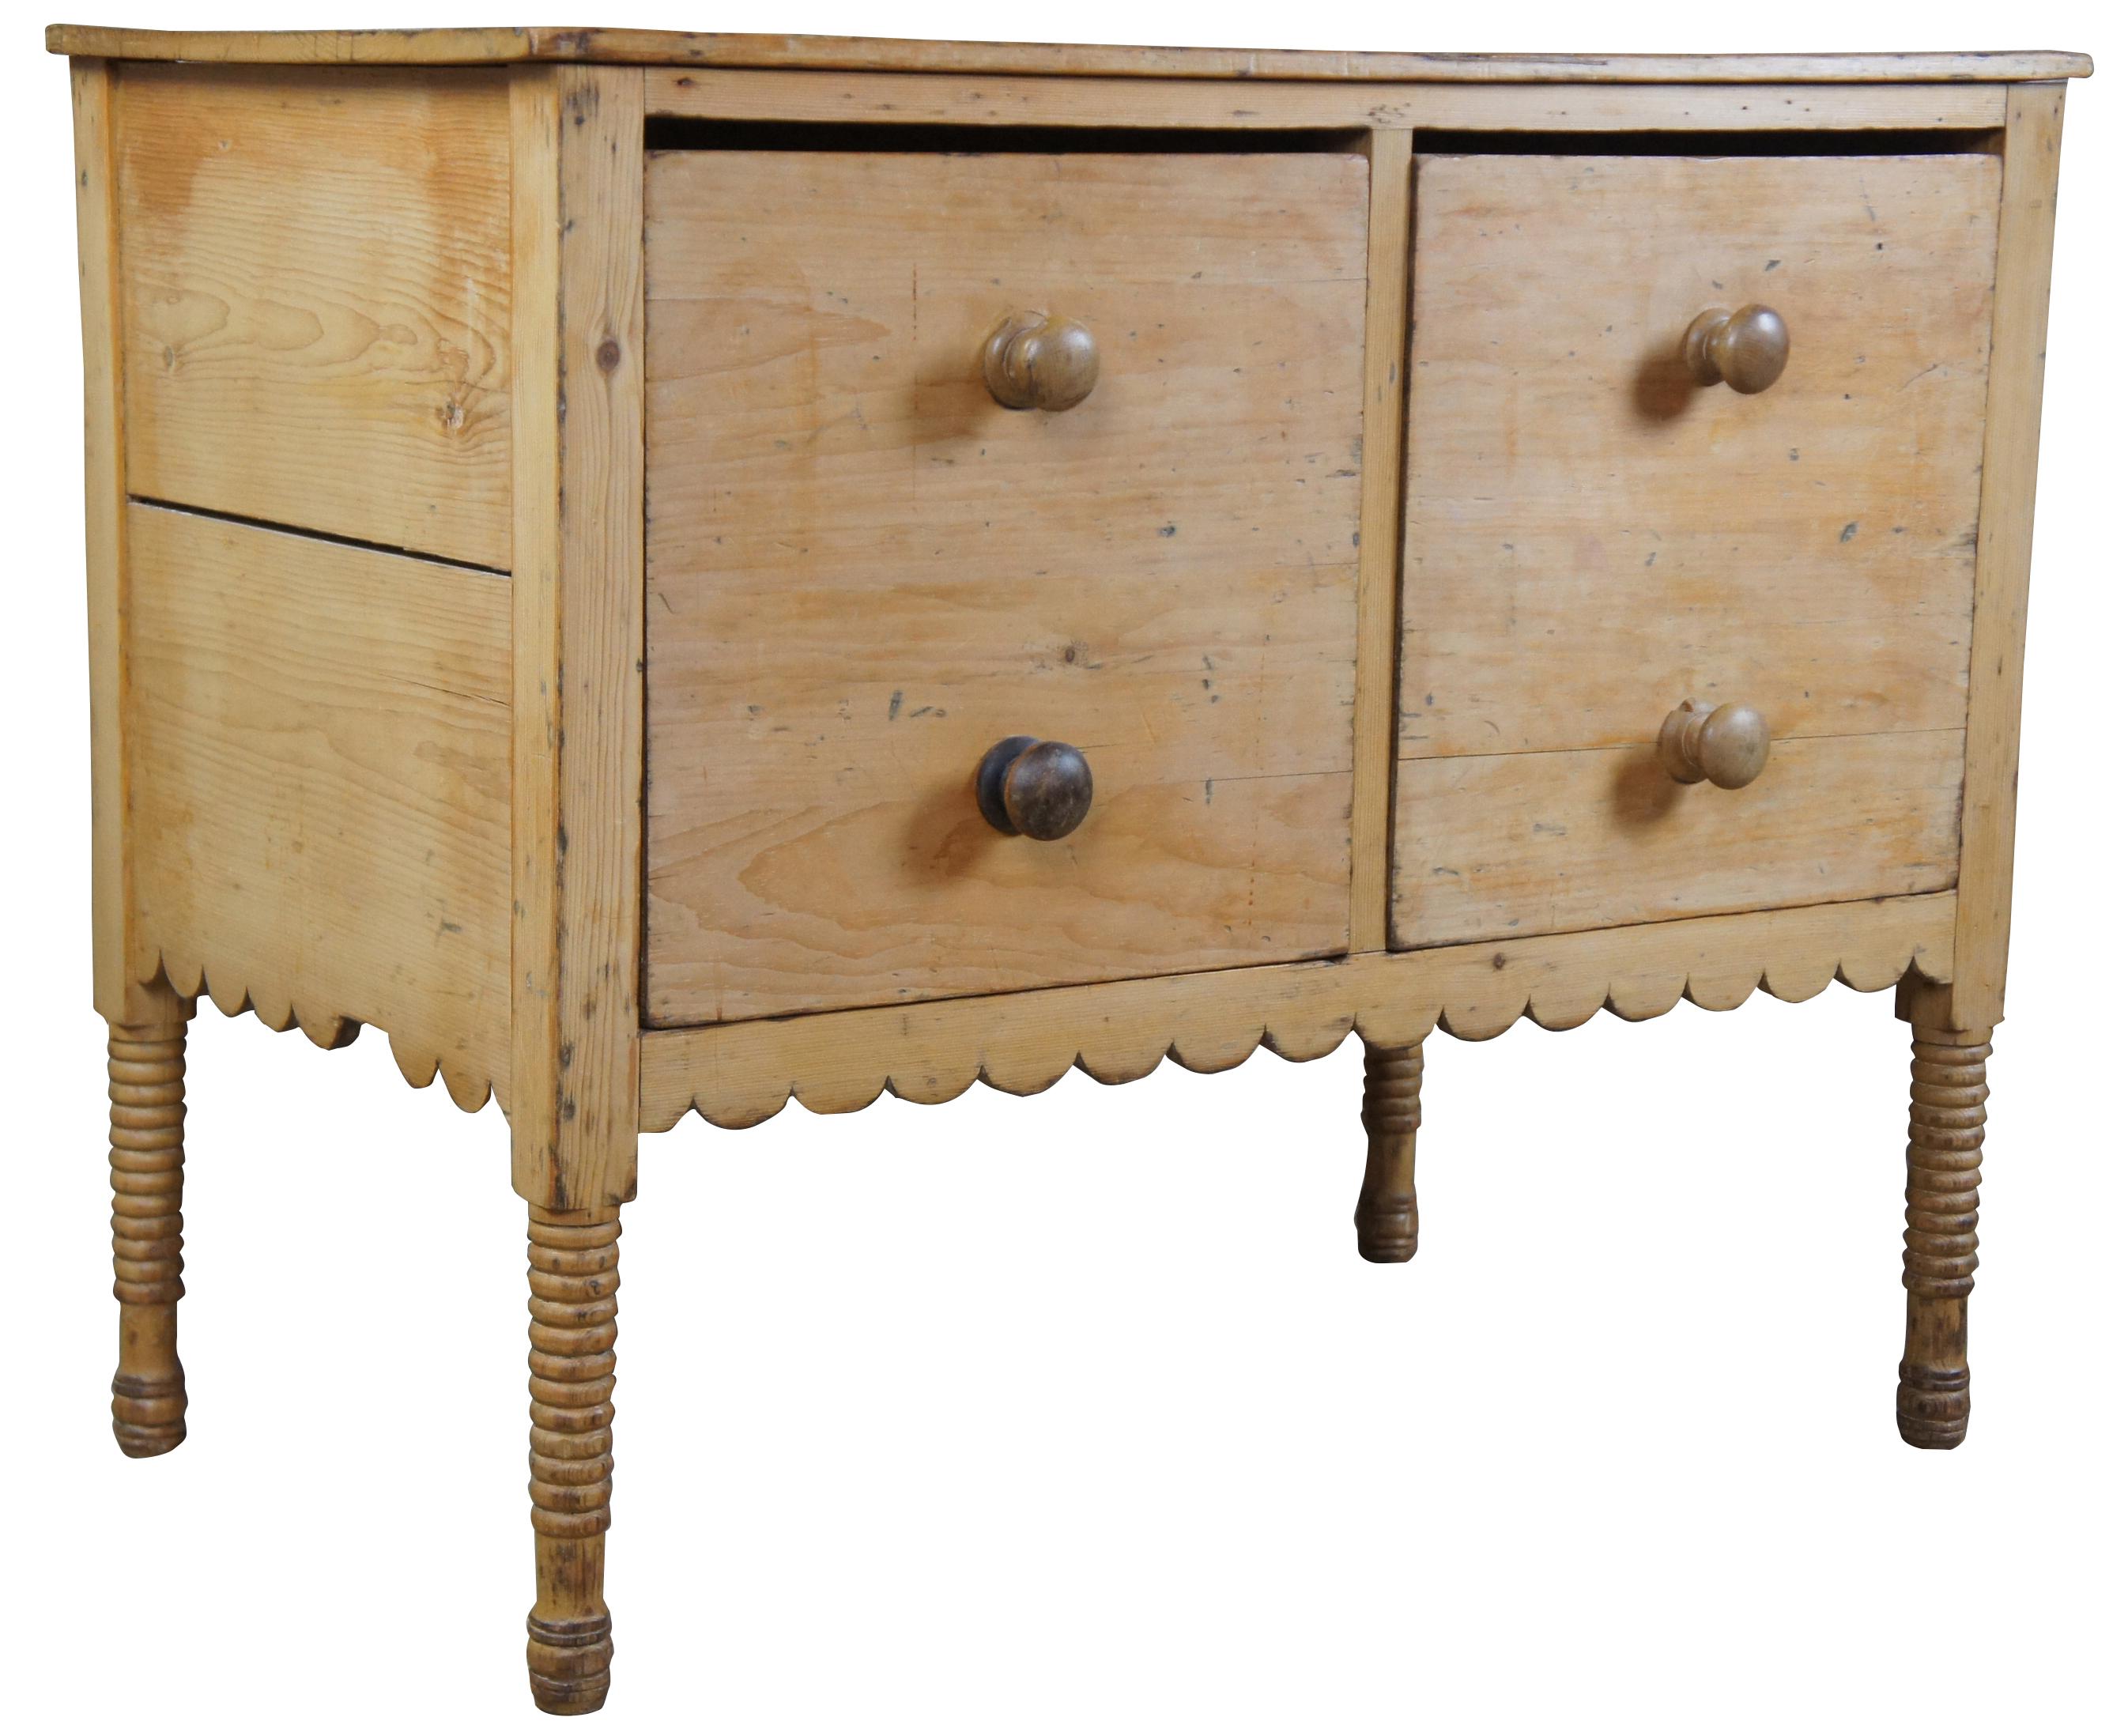 Antique 19th century early American pine chest. Features two large hand dovetailed drawers making for perfect use as a dough bin slash box. Includes carved aprons and ribbed legs.
 